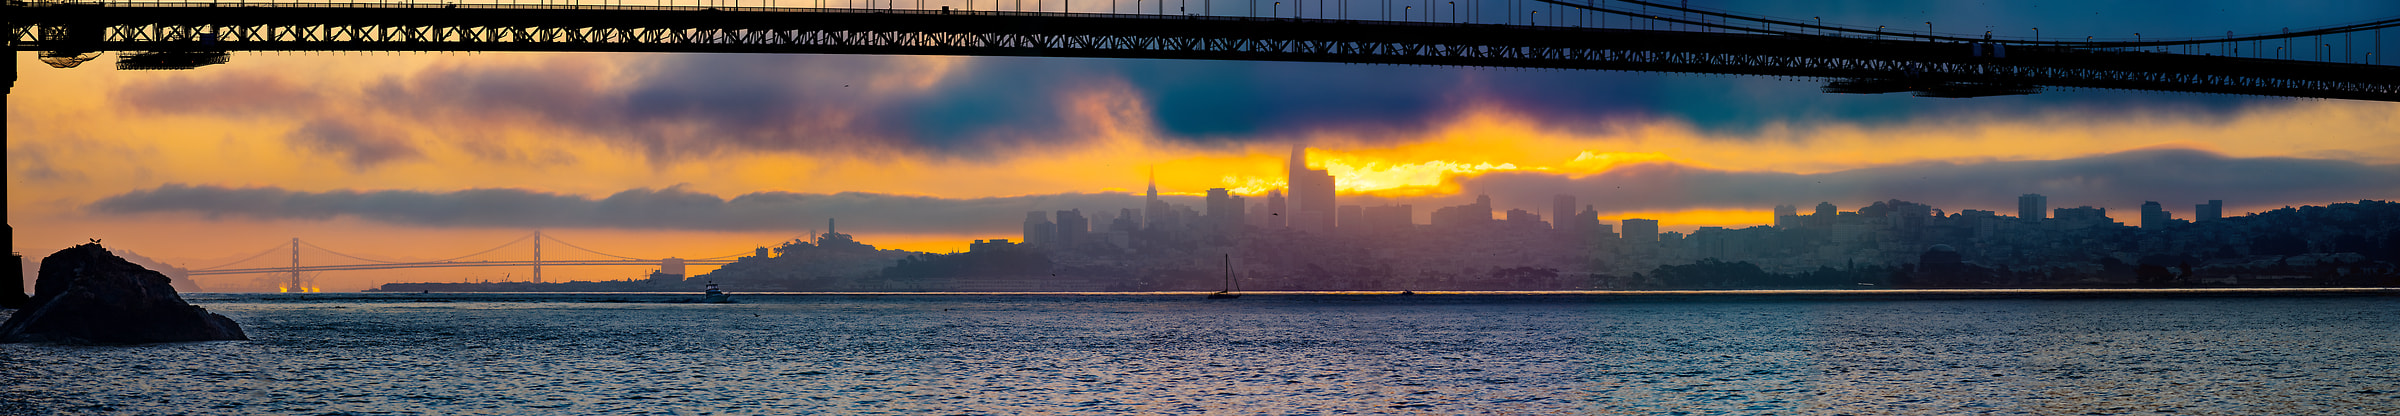 472 megapixels! A very high resolution, wide VAST photo print of sunrise and the San Francisco skyline; panorama photograph created by Nicholas Gonzales in Kirby Cove, Milly Valley, California.